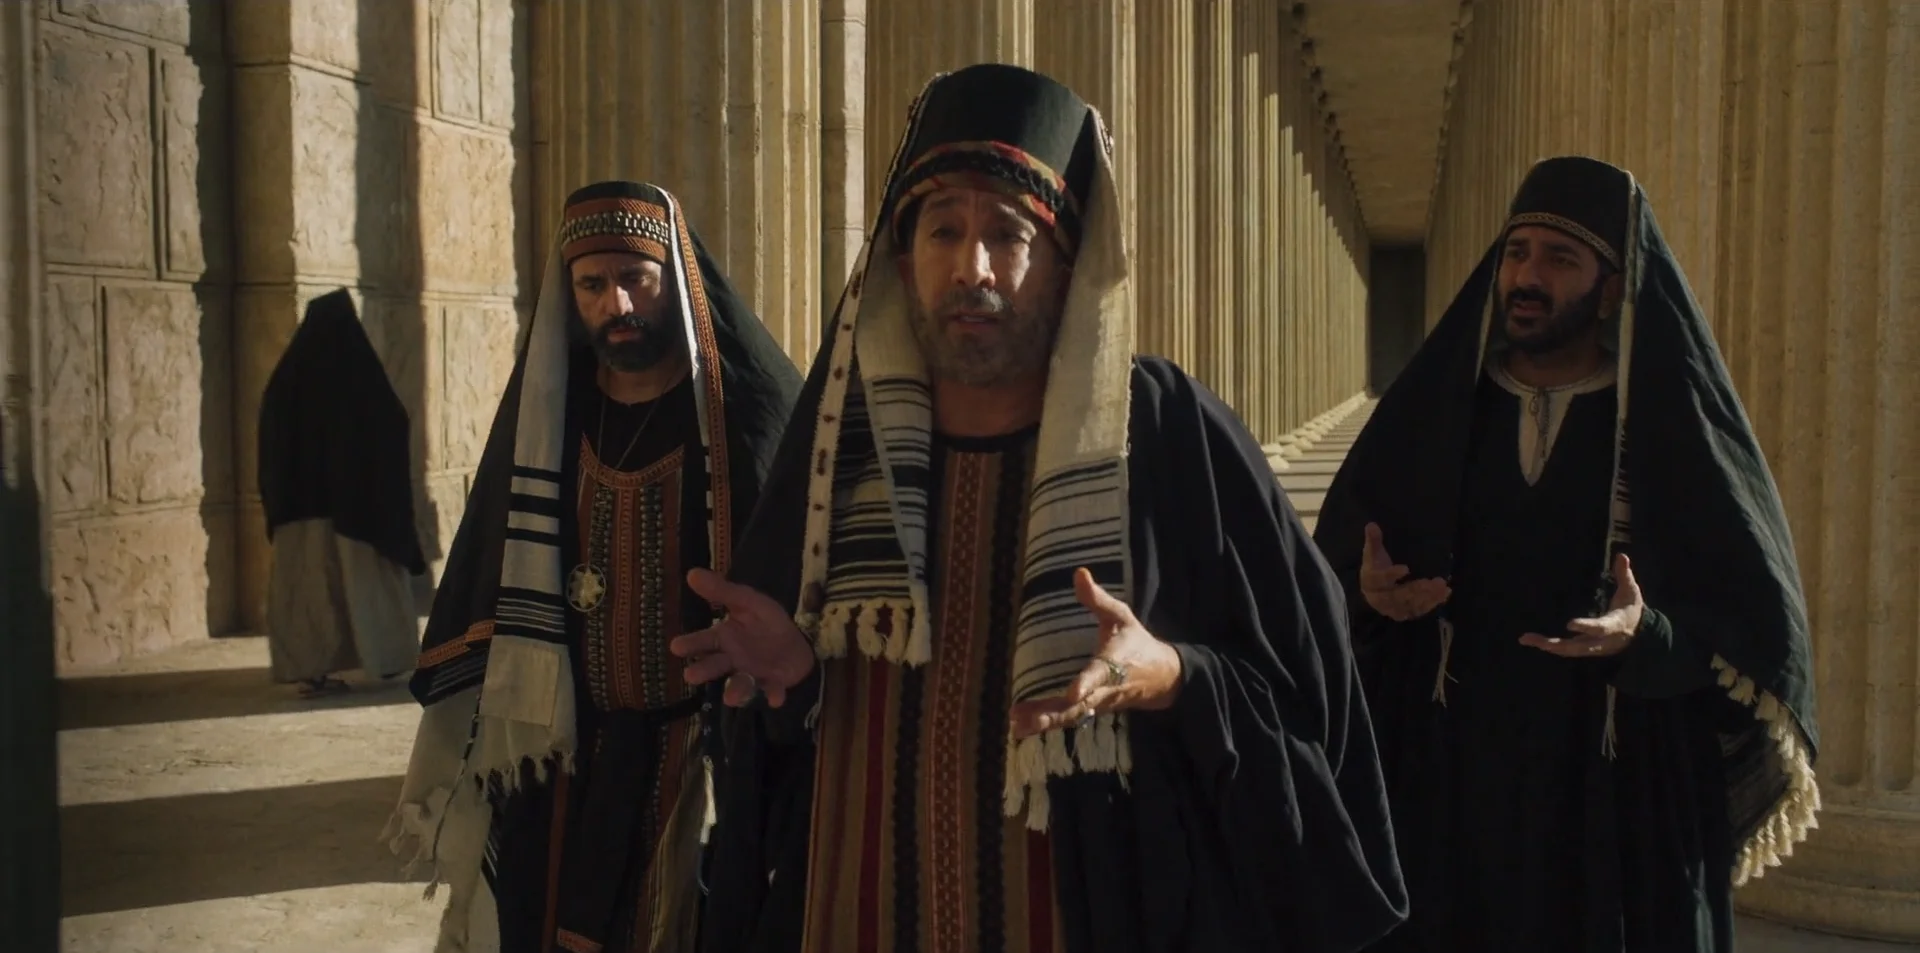 Image of the Pharisees